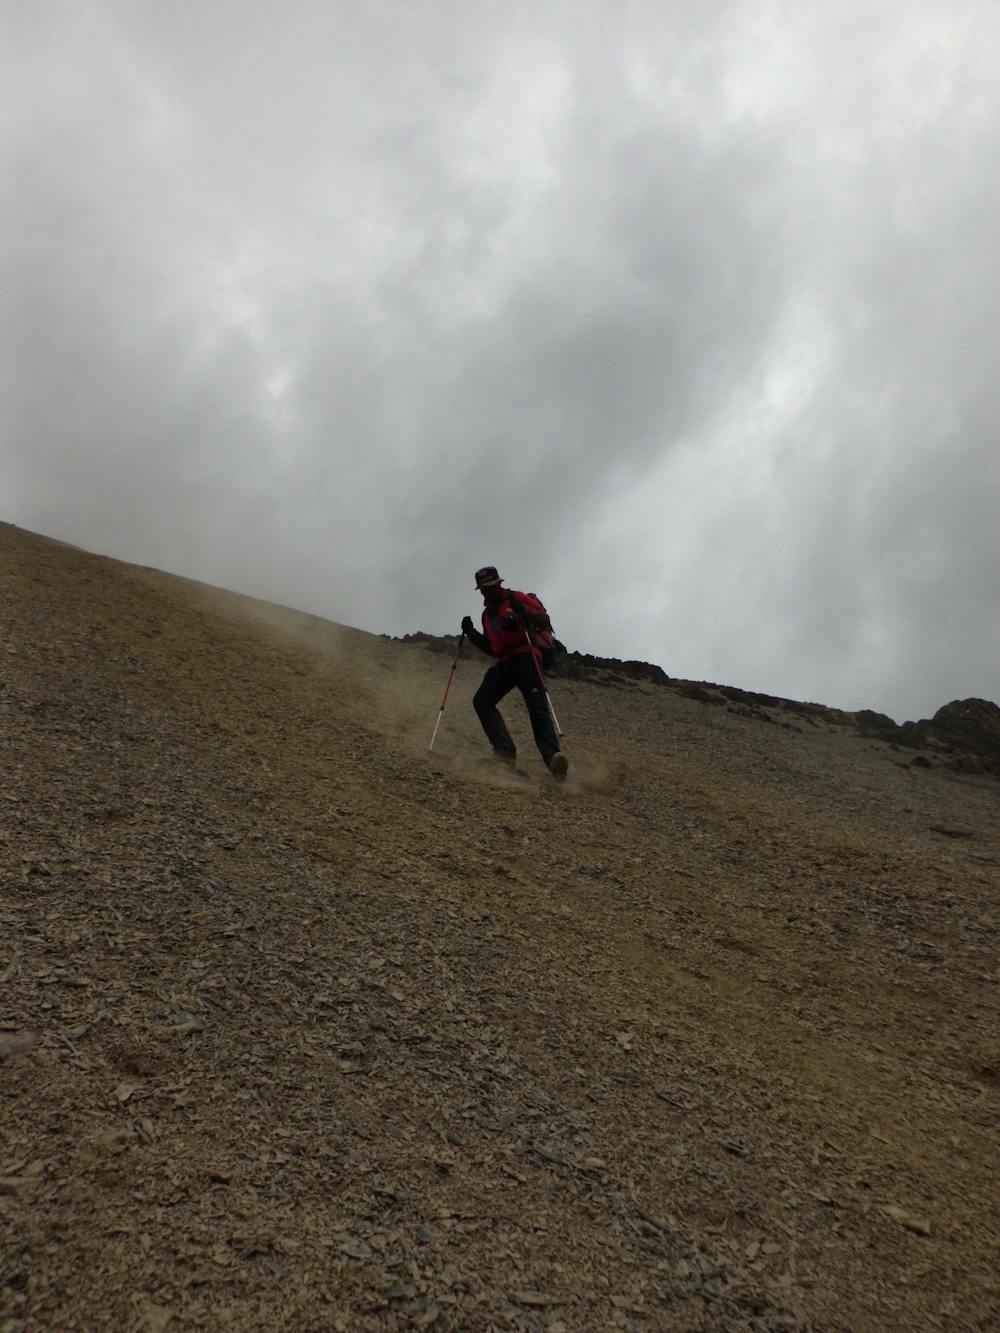 Scree running! Bolivia is a classic scree running location